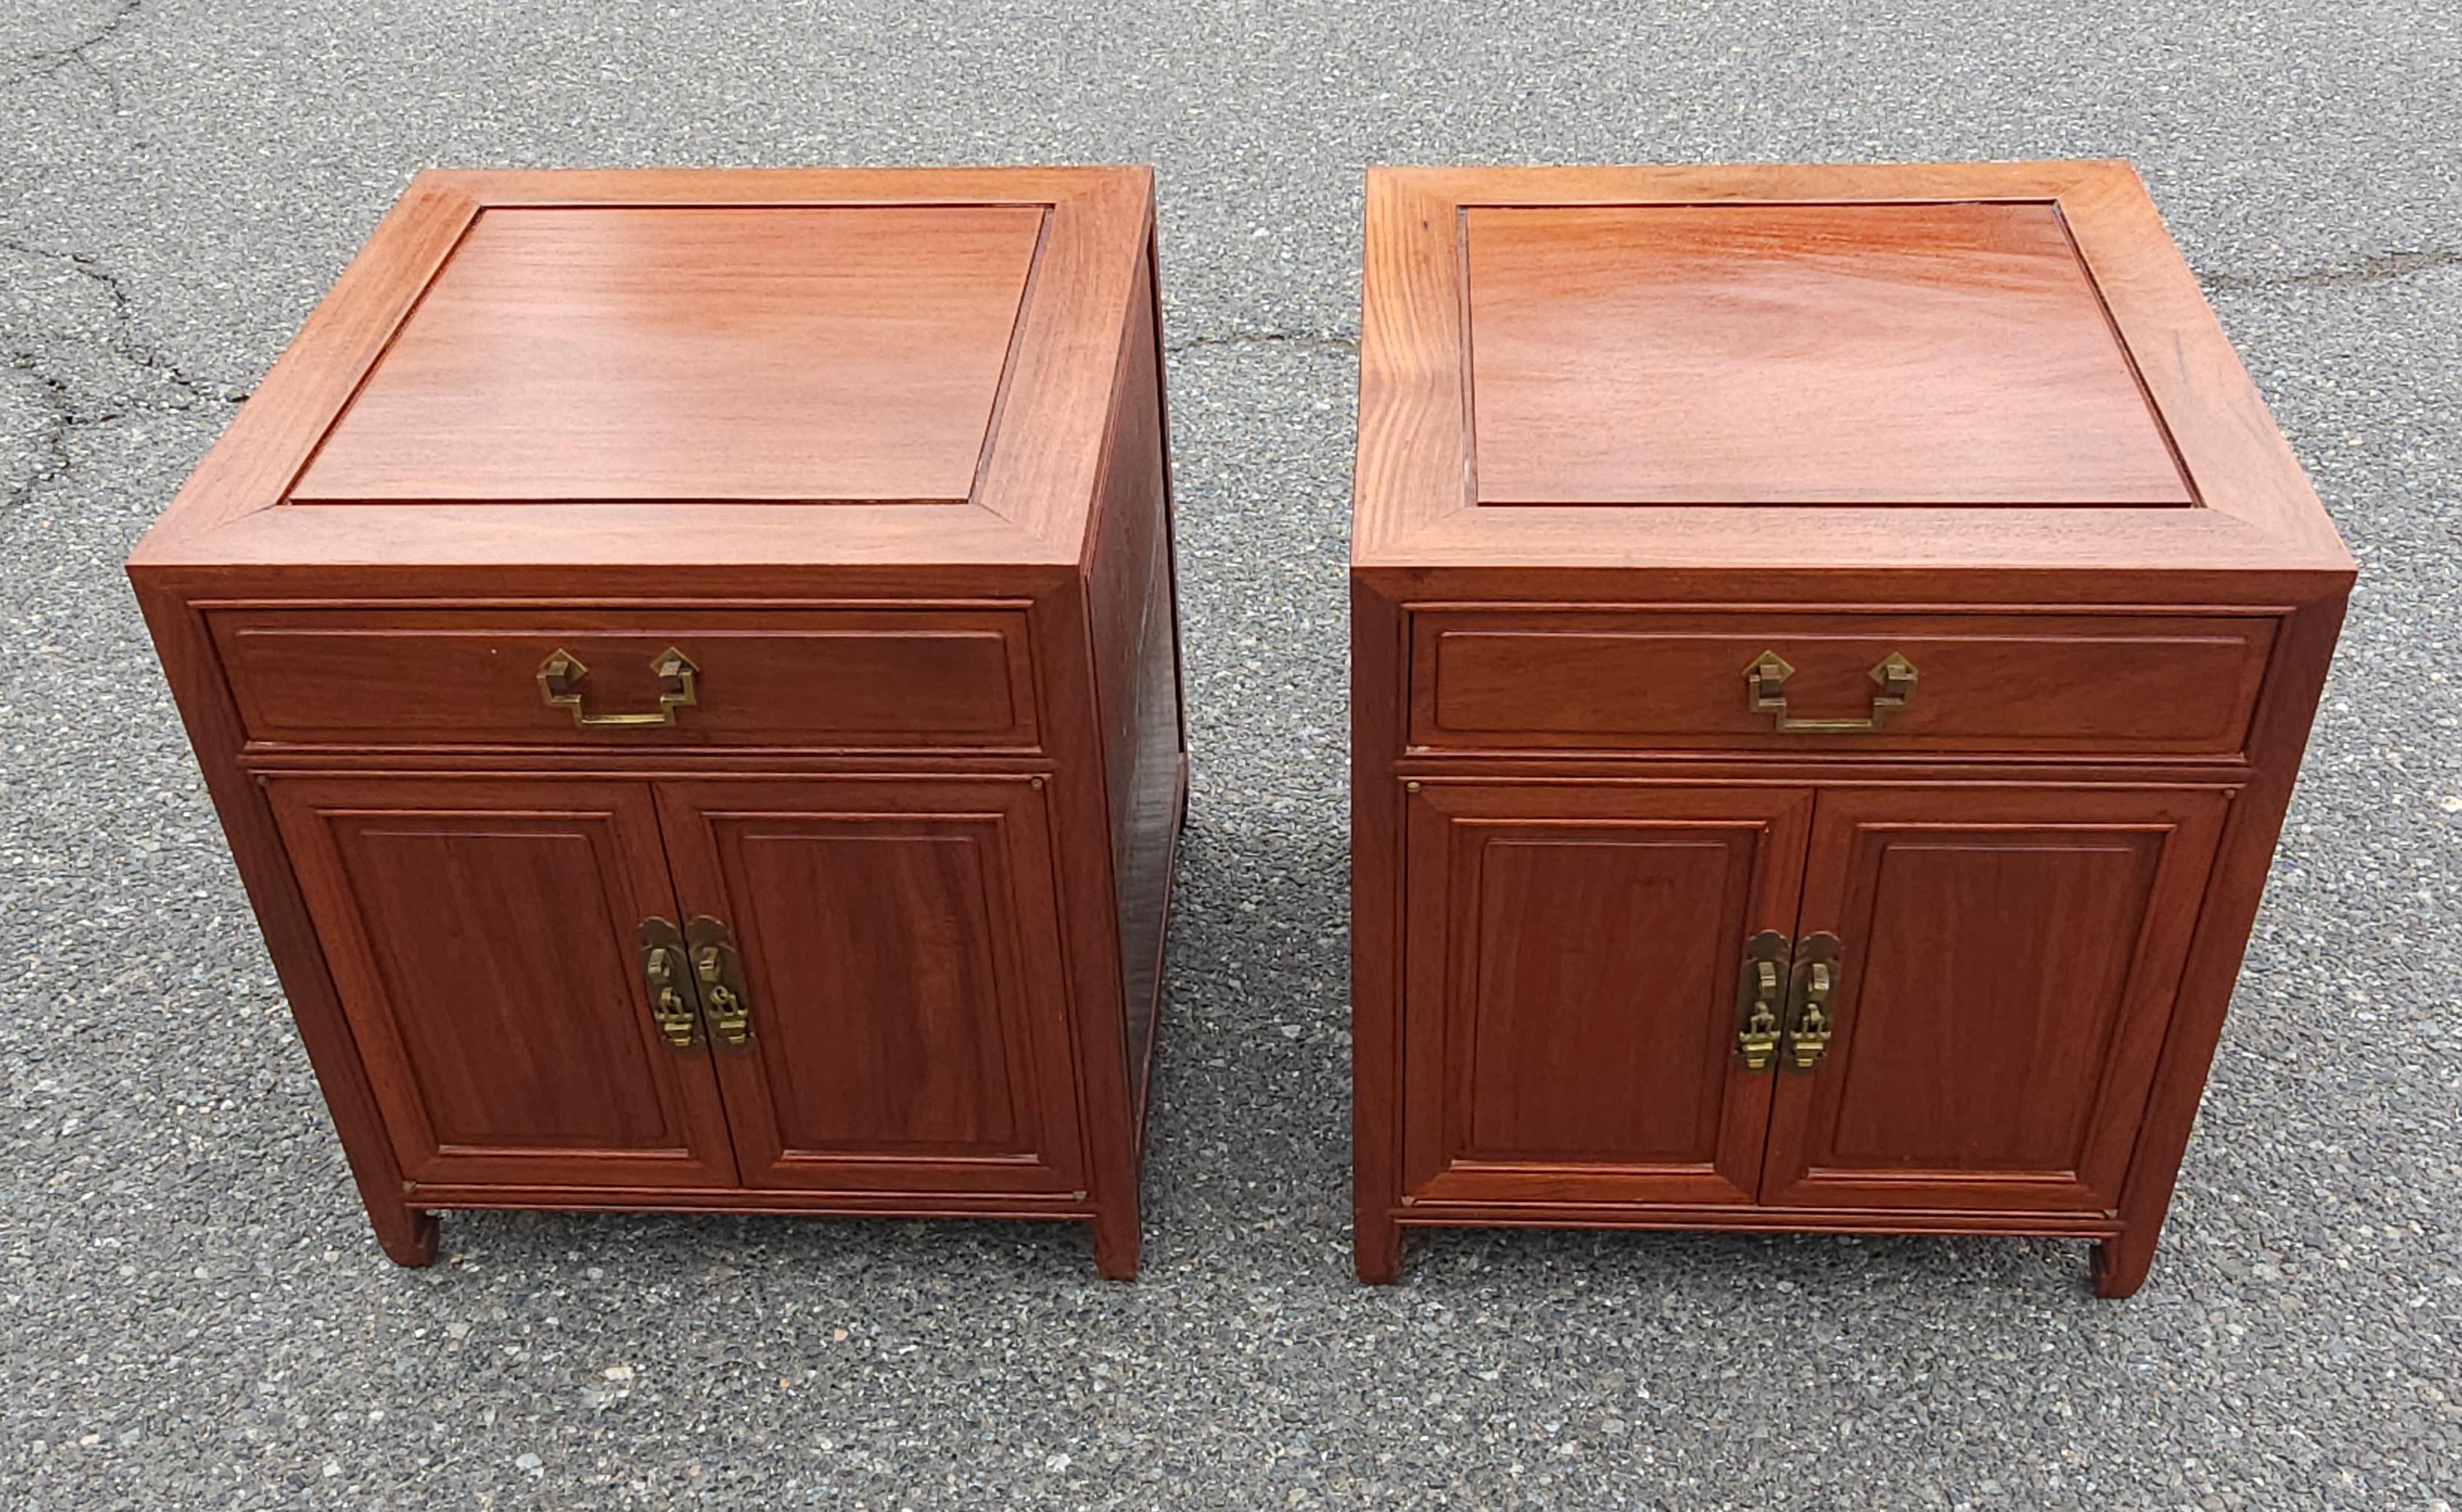 An exquisite Pair of Mid 20th Century Ming Style Rosewood Side Table Cabinets with protective Glass Tops. Pristine vintage condition with very light signs of use.
Feature  a single top drawer and two-door bottom cabinet with a removable